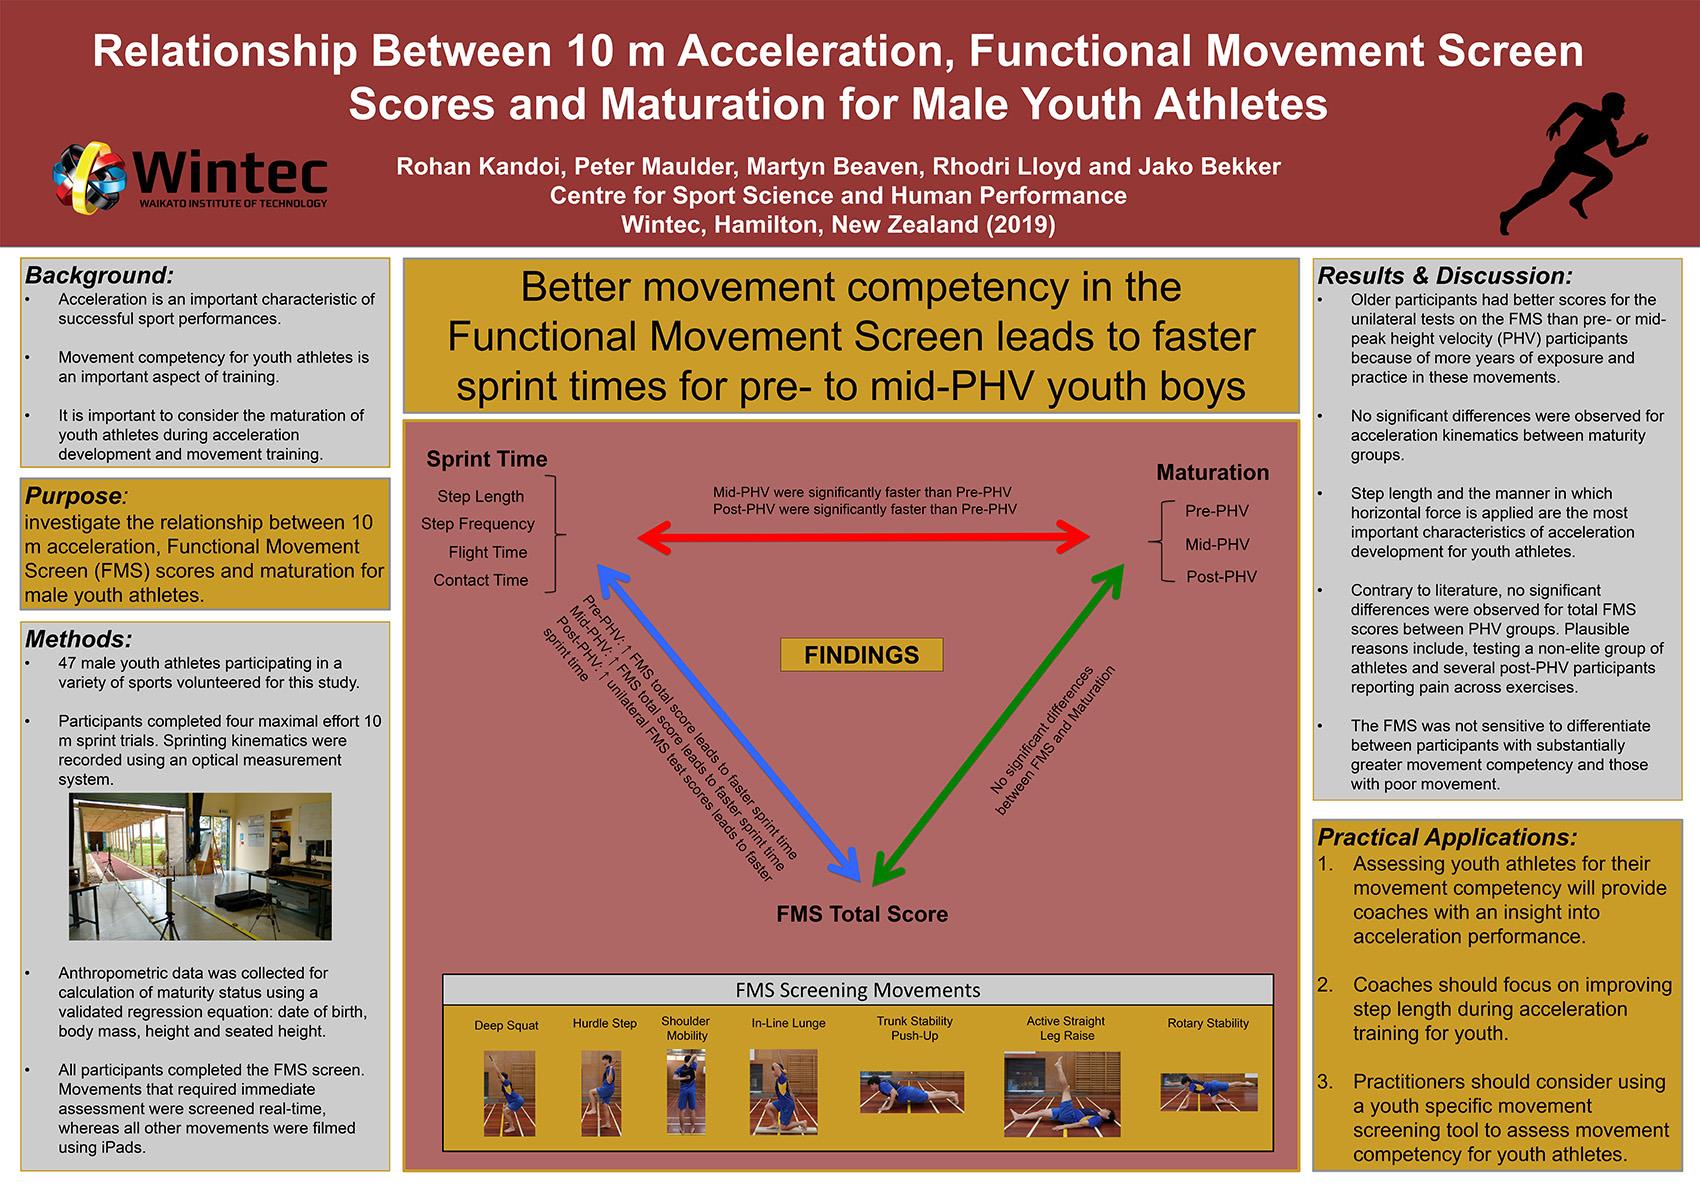 Relationship Between 10m Acceleration, Functional Movement Screen Scores and Maturation for Male Youth Athletes